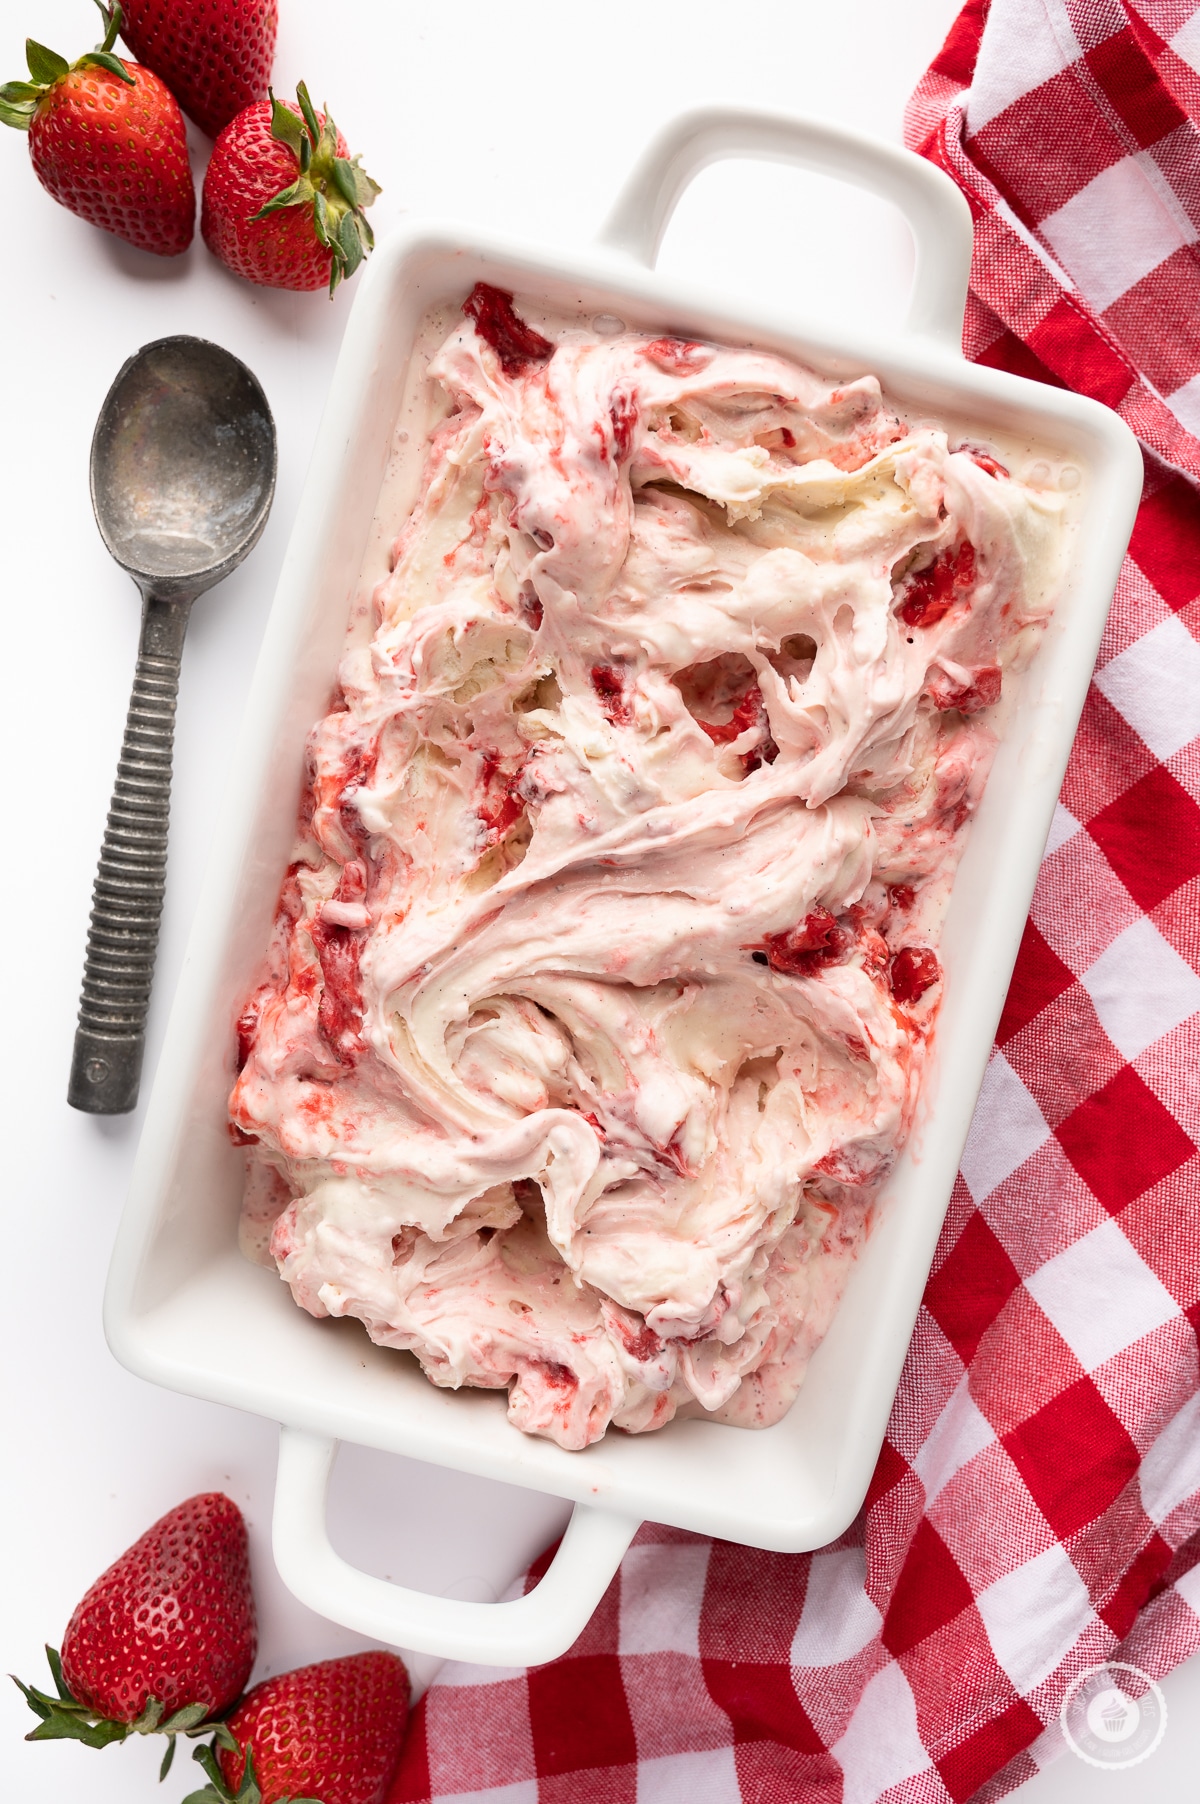 Low carb strawberry cheesecake ice cream in a ceramic dish with a vintage ice cream scoop, fresh berries and red and white check napkin all on a bright white background